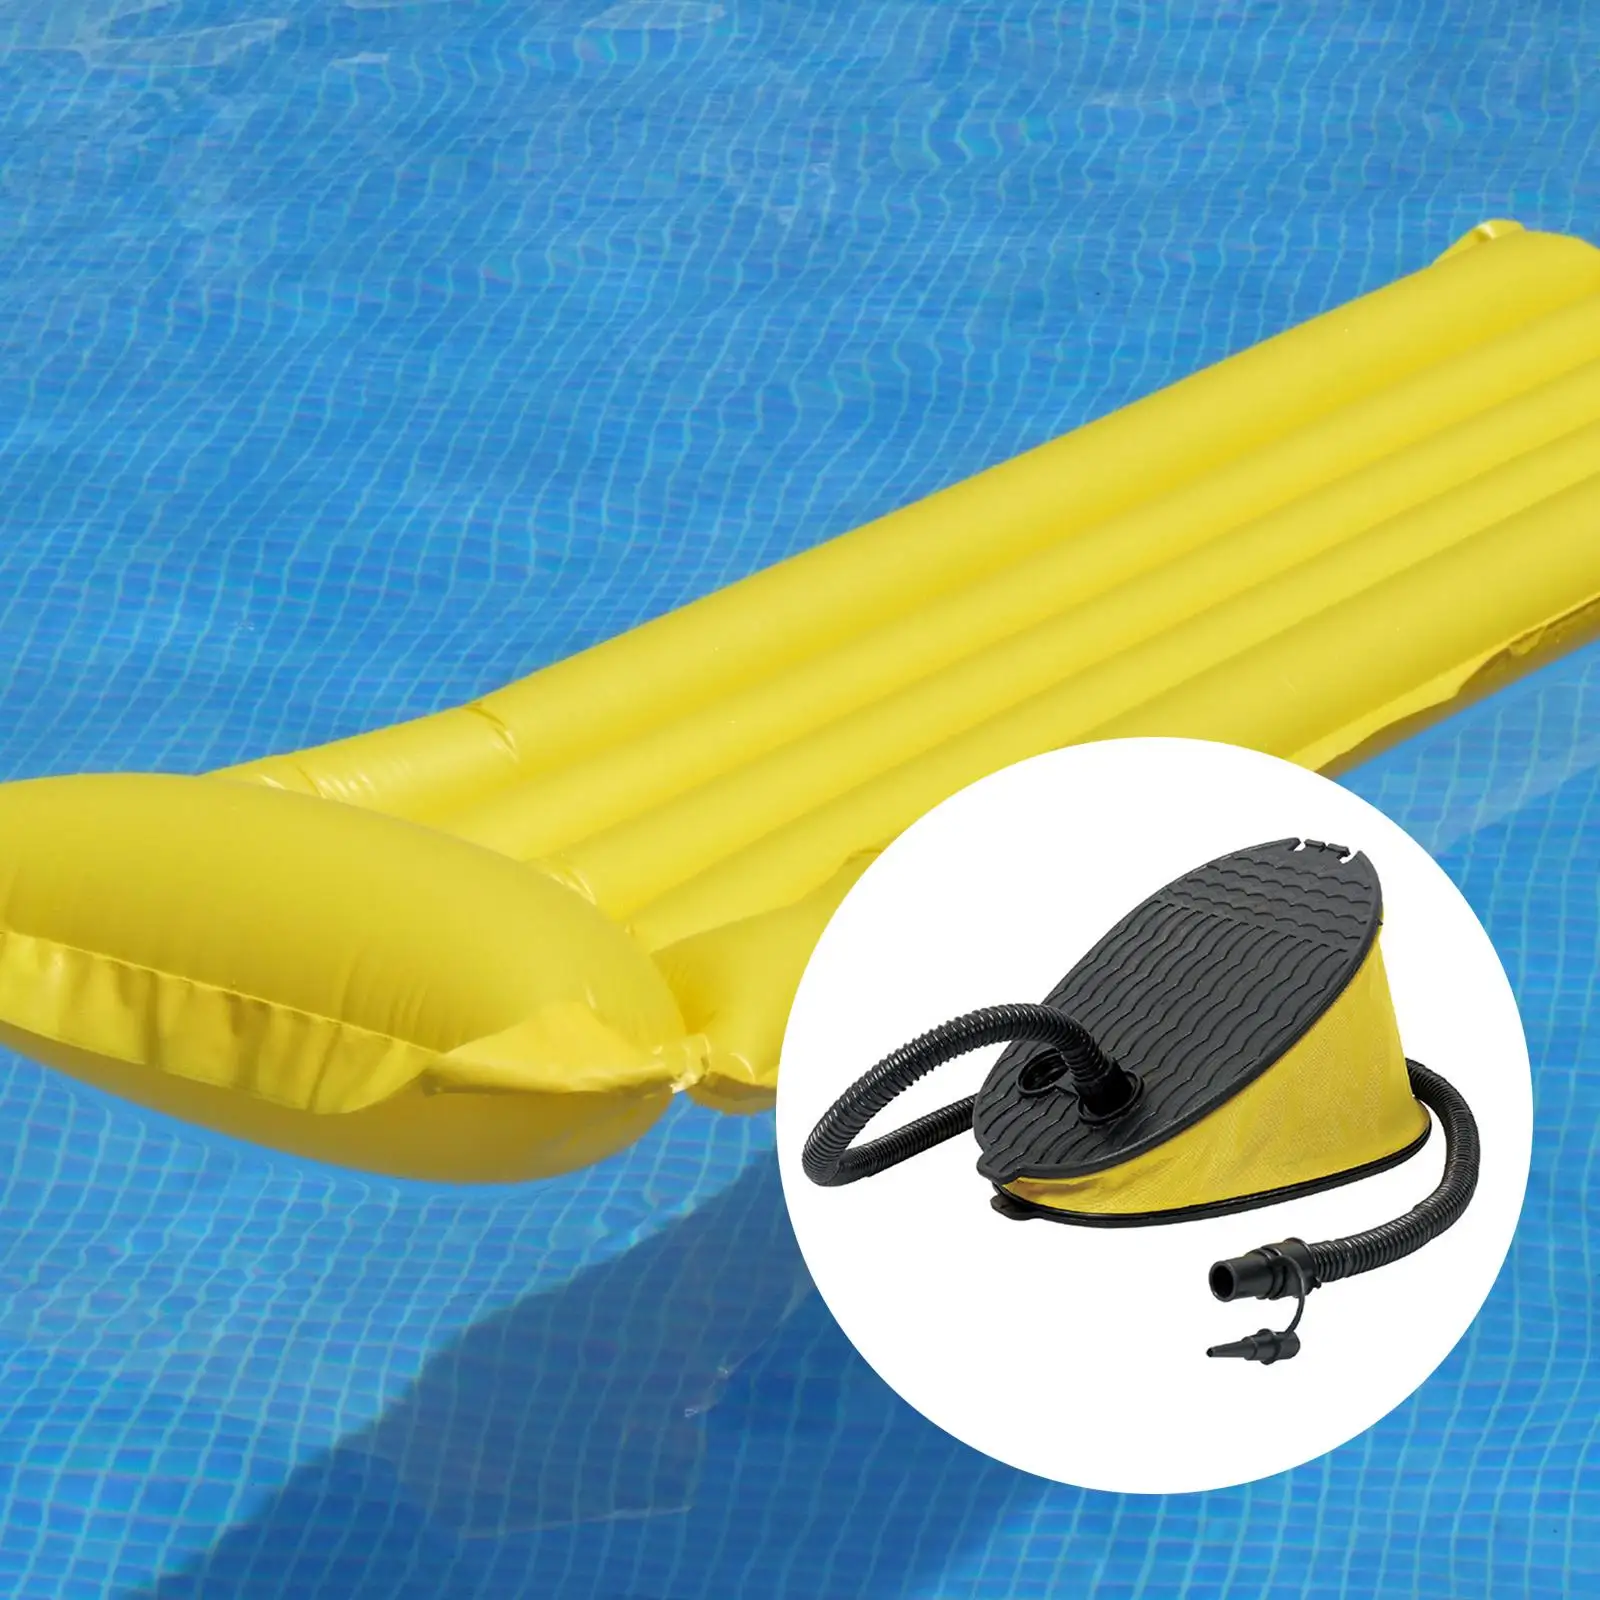 Bellows Foot Pump with Nozzle Easy Inflate Deflate Air Pump Inflator for Inflatable Boat Tube Exercise Ball Outdoor Yoga